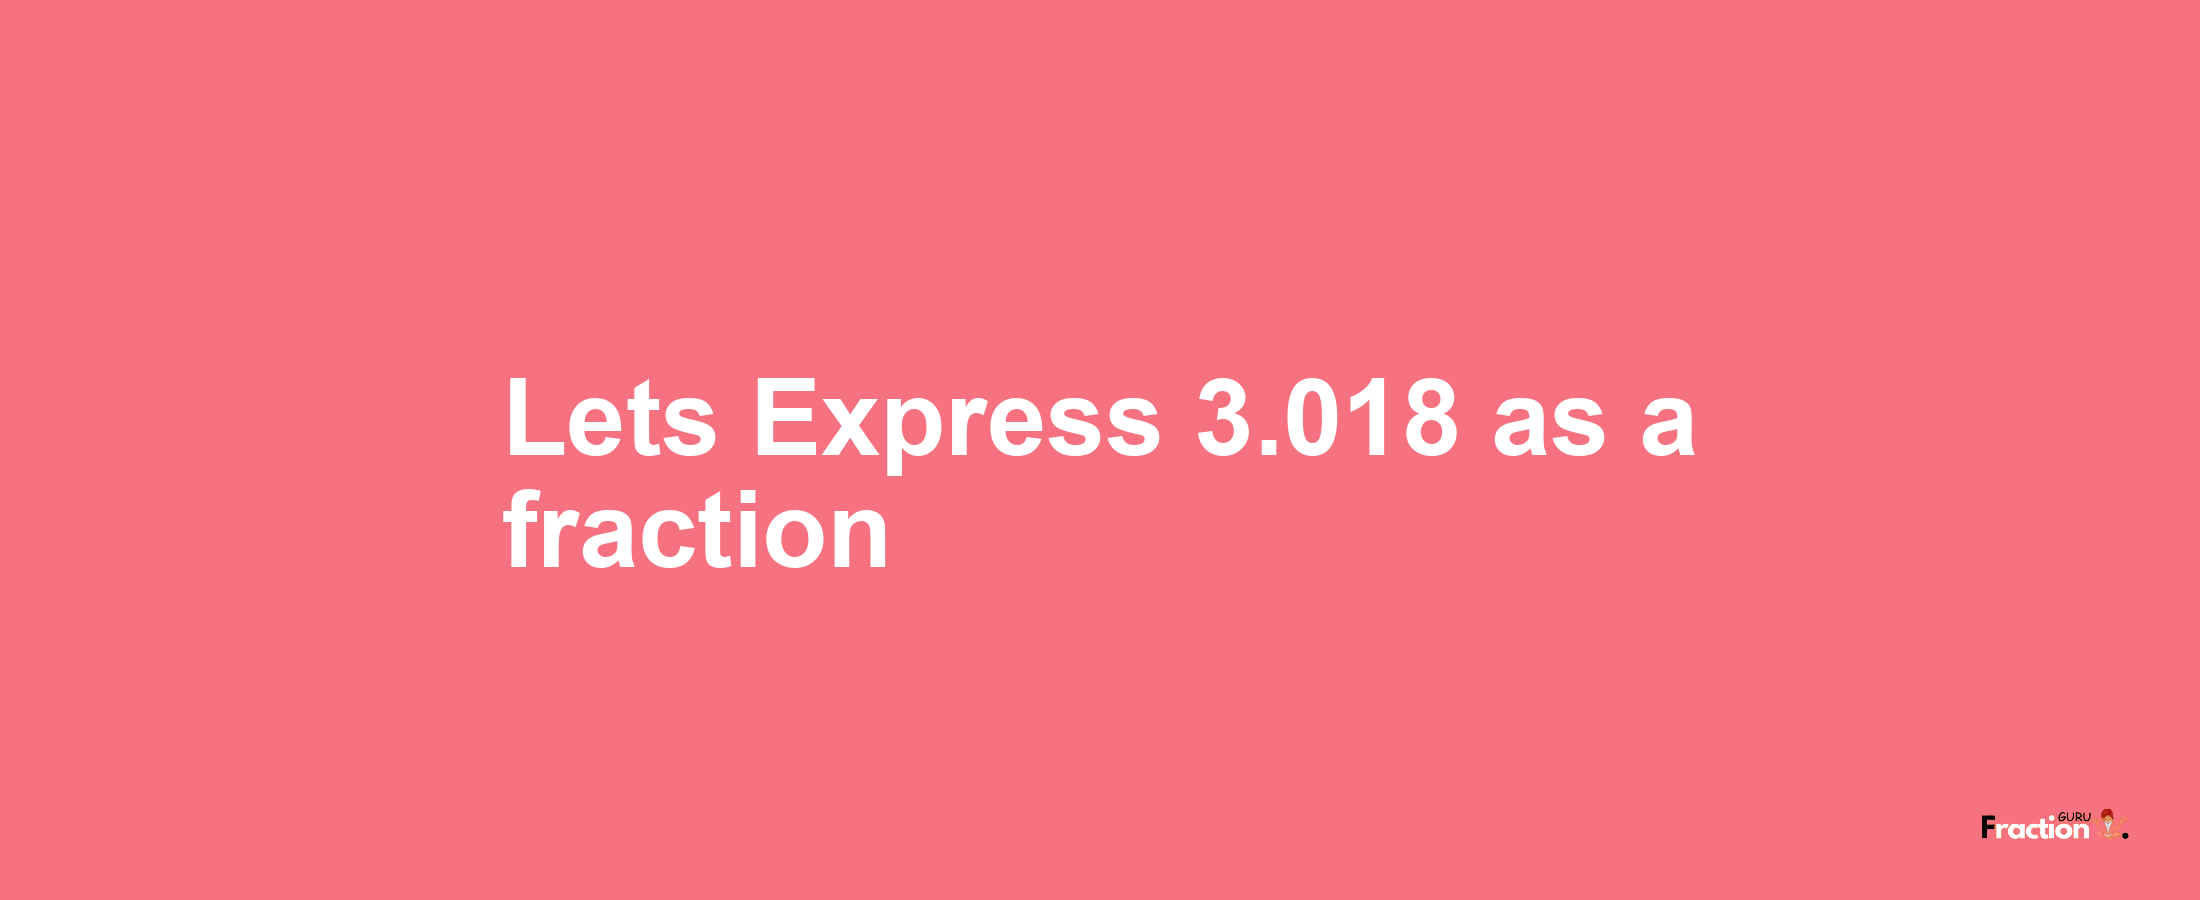 Lets Express 3.018 as afraction